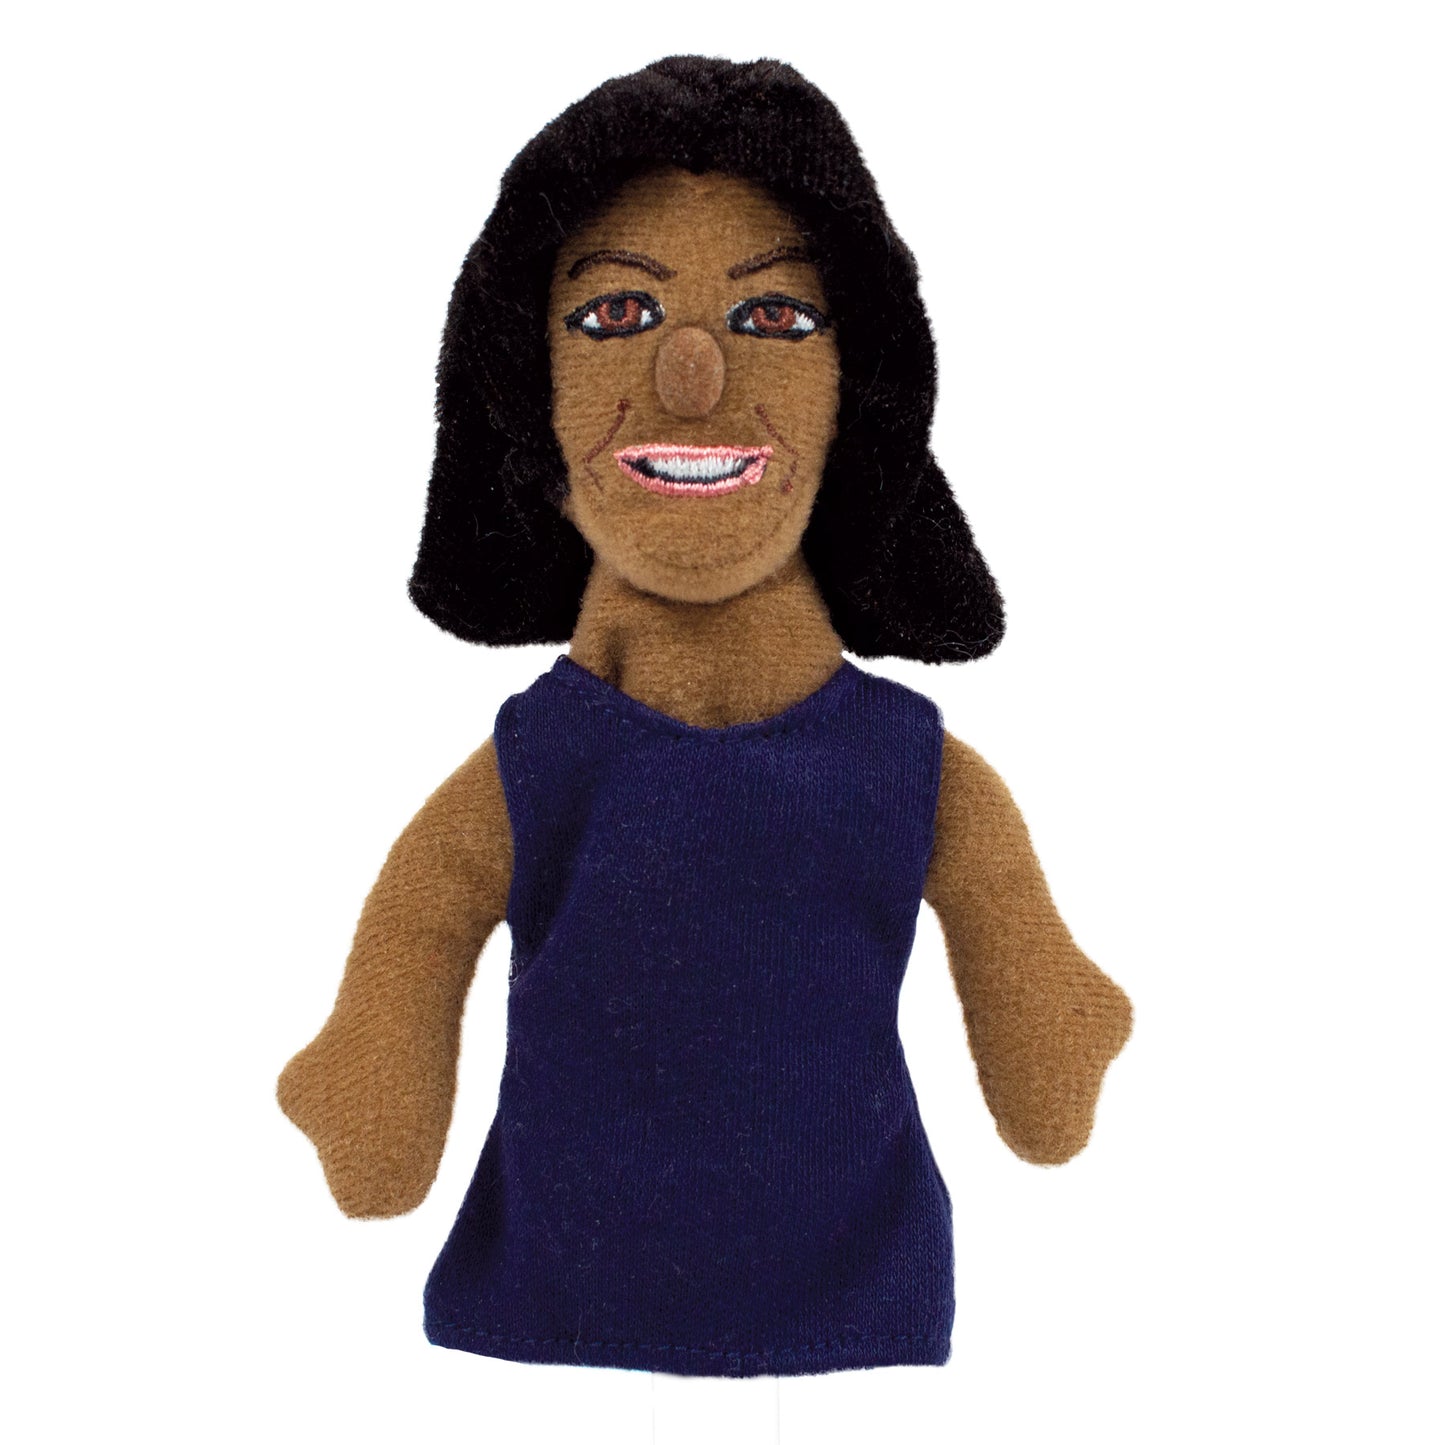 Michelle Obama Magnetic Personality